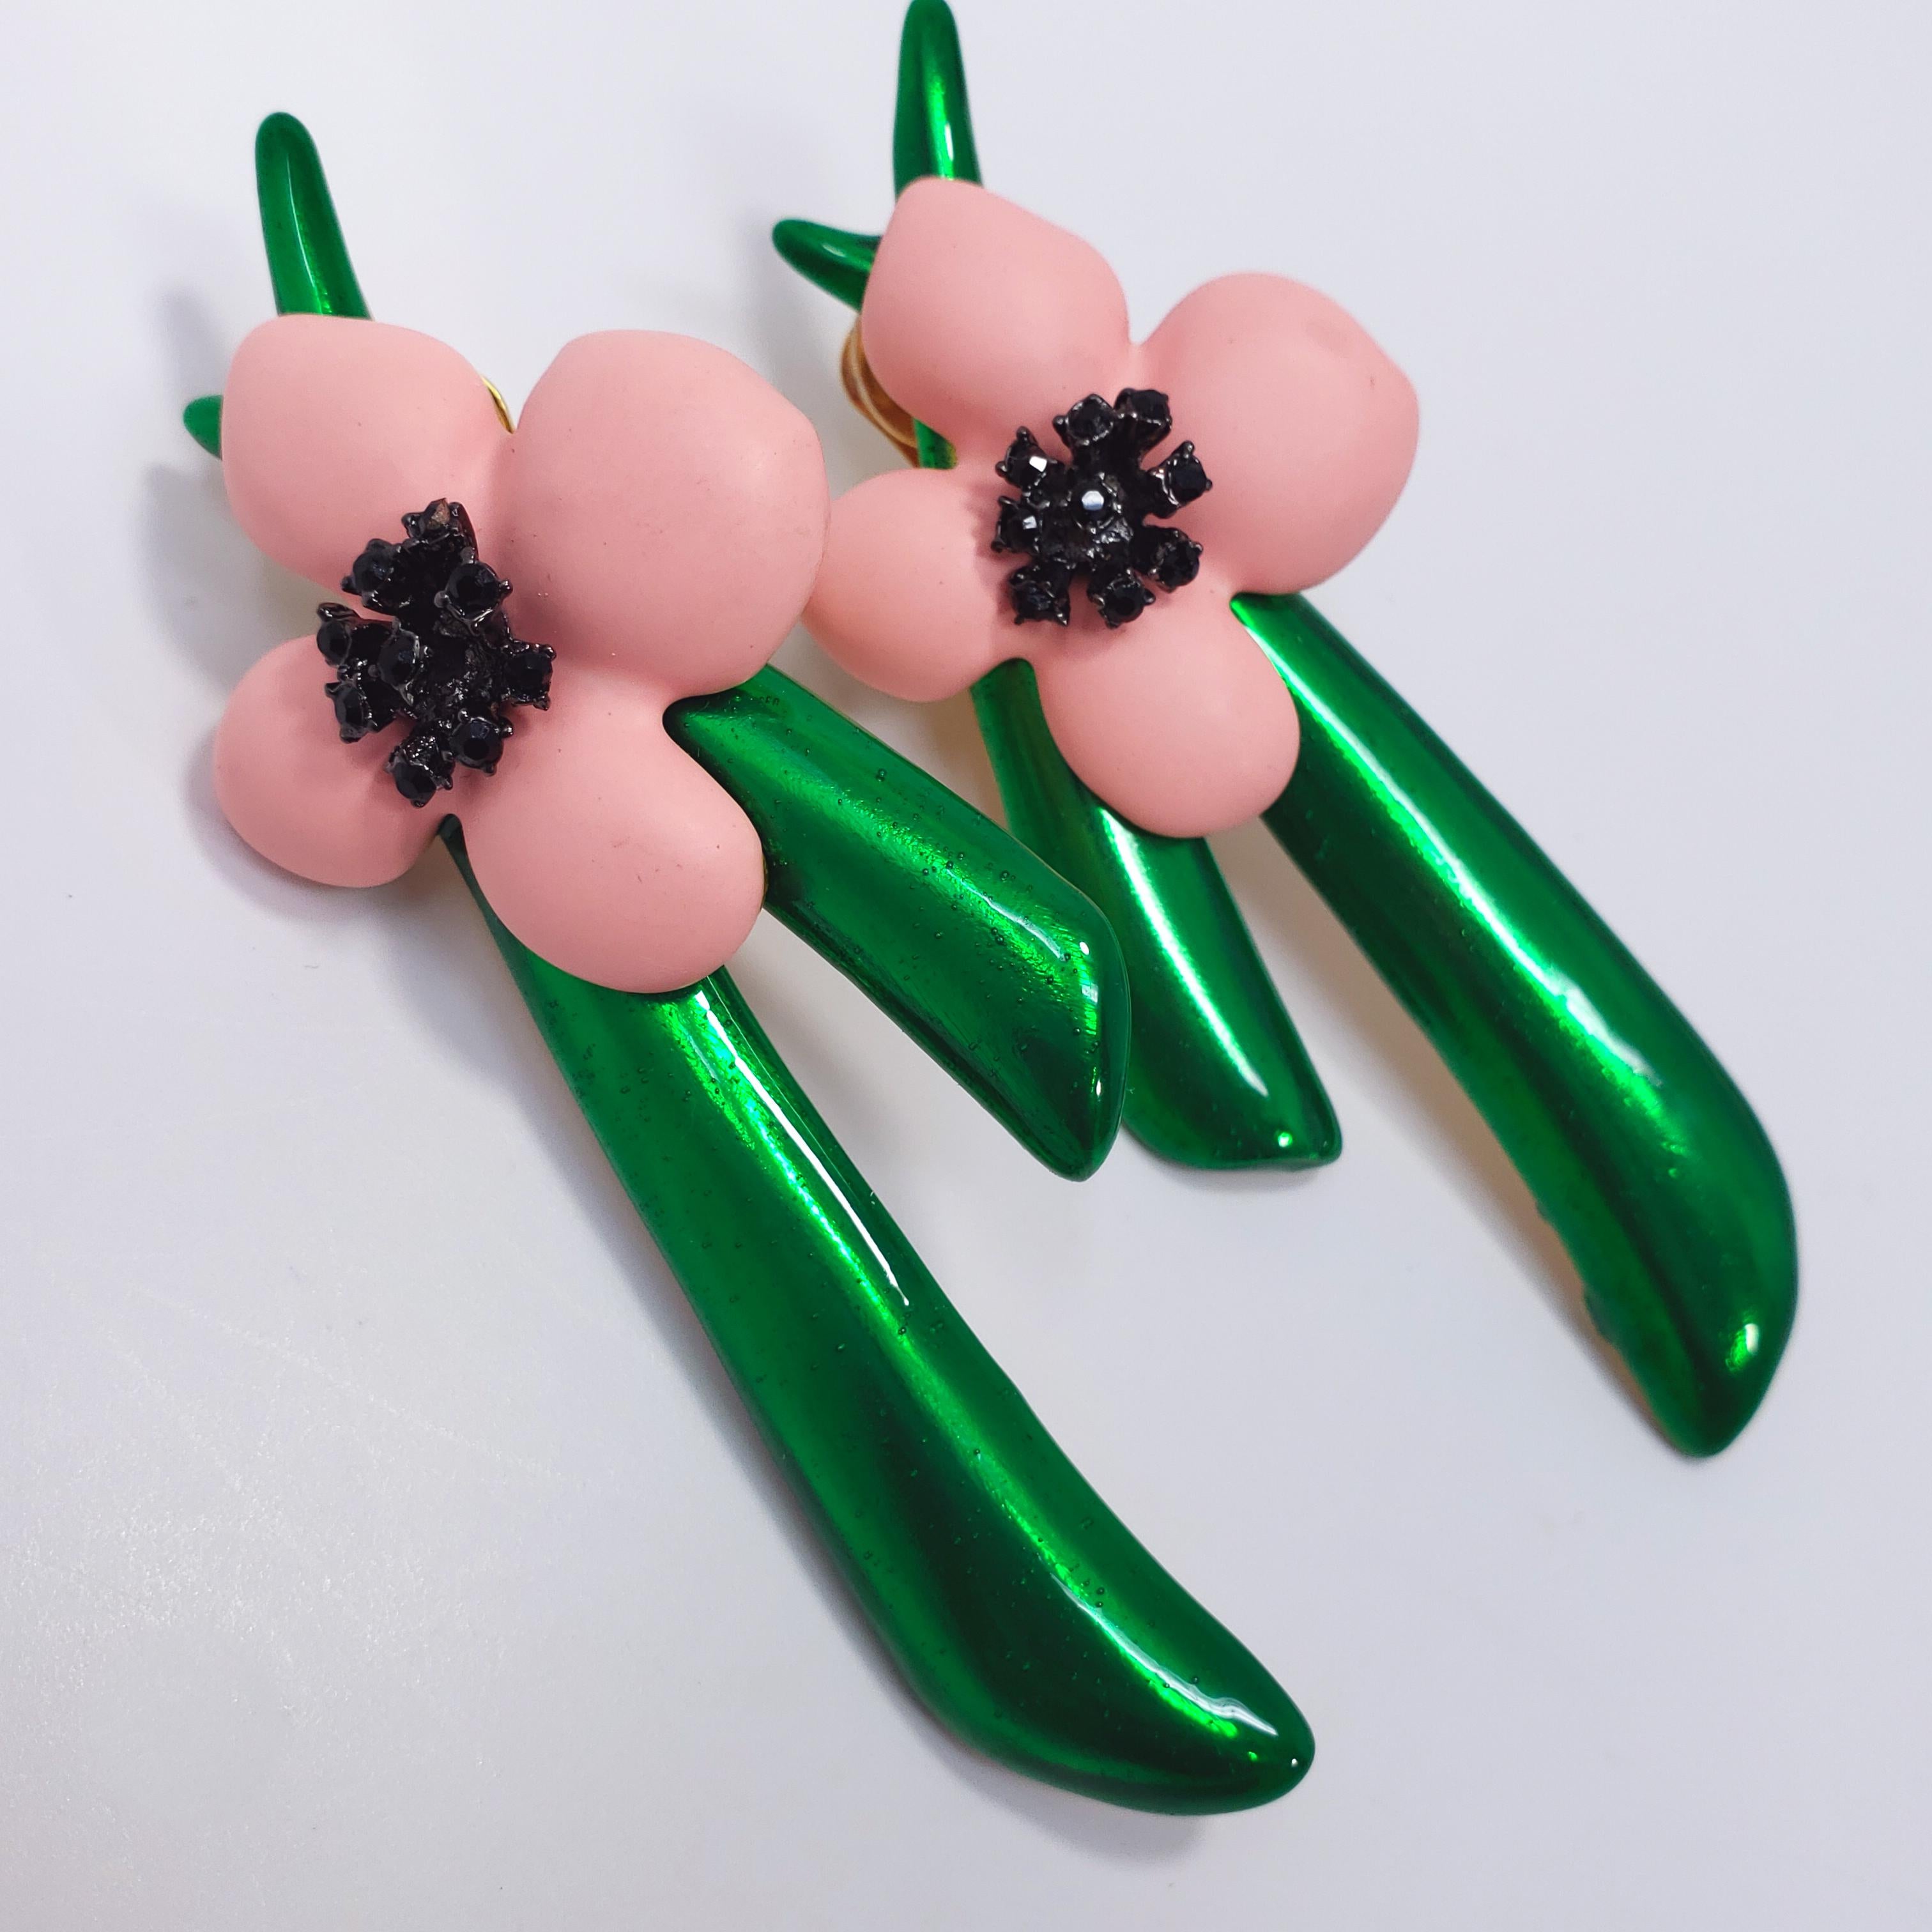 Blooming beauty! A charming set of clip on earrings from a rare Oscar de la Renta floral collection. The flowers feature soft pink resin petals and a painted green stem. The jet black crystals add striking contrast to these bright and colorful